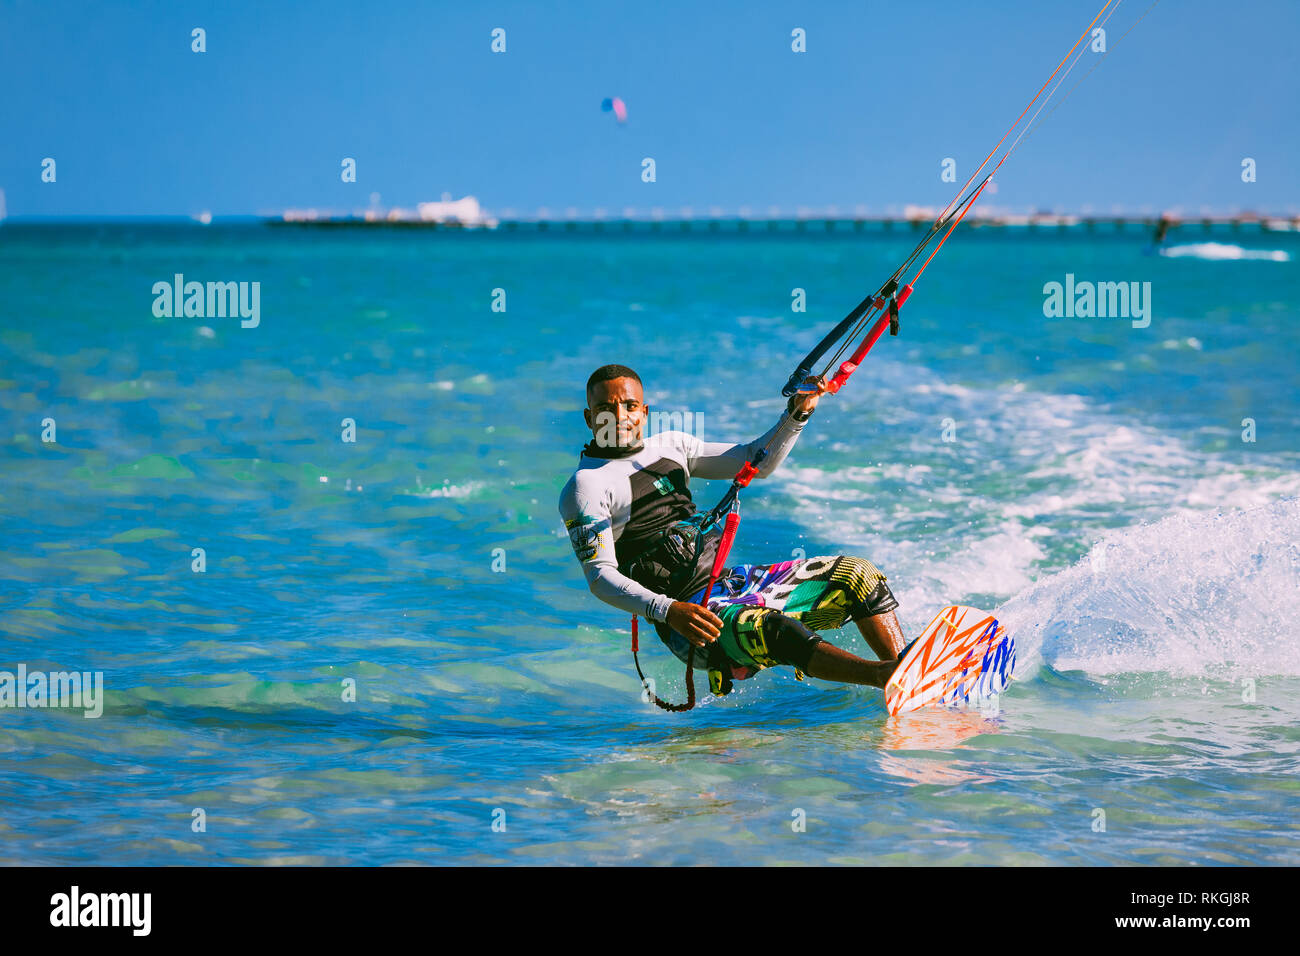 Egypt, Hurghada - 30 November, 2017: The kiter on the wakeboard holding the kite straps. The wave riding over the crystal clear Red sea surface. The p Stock Photo